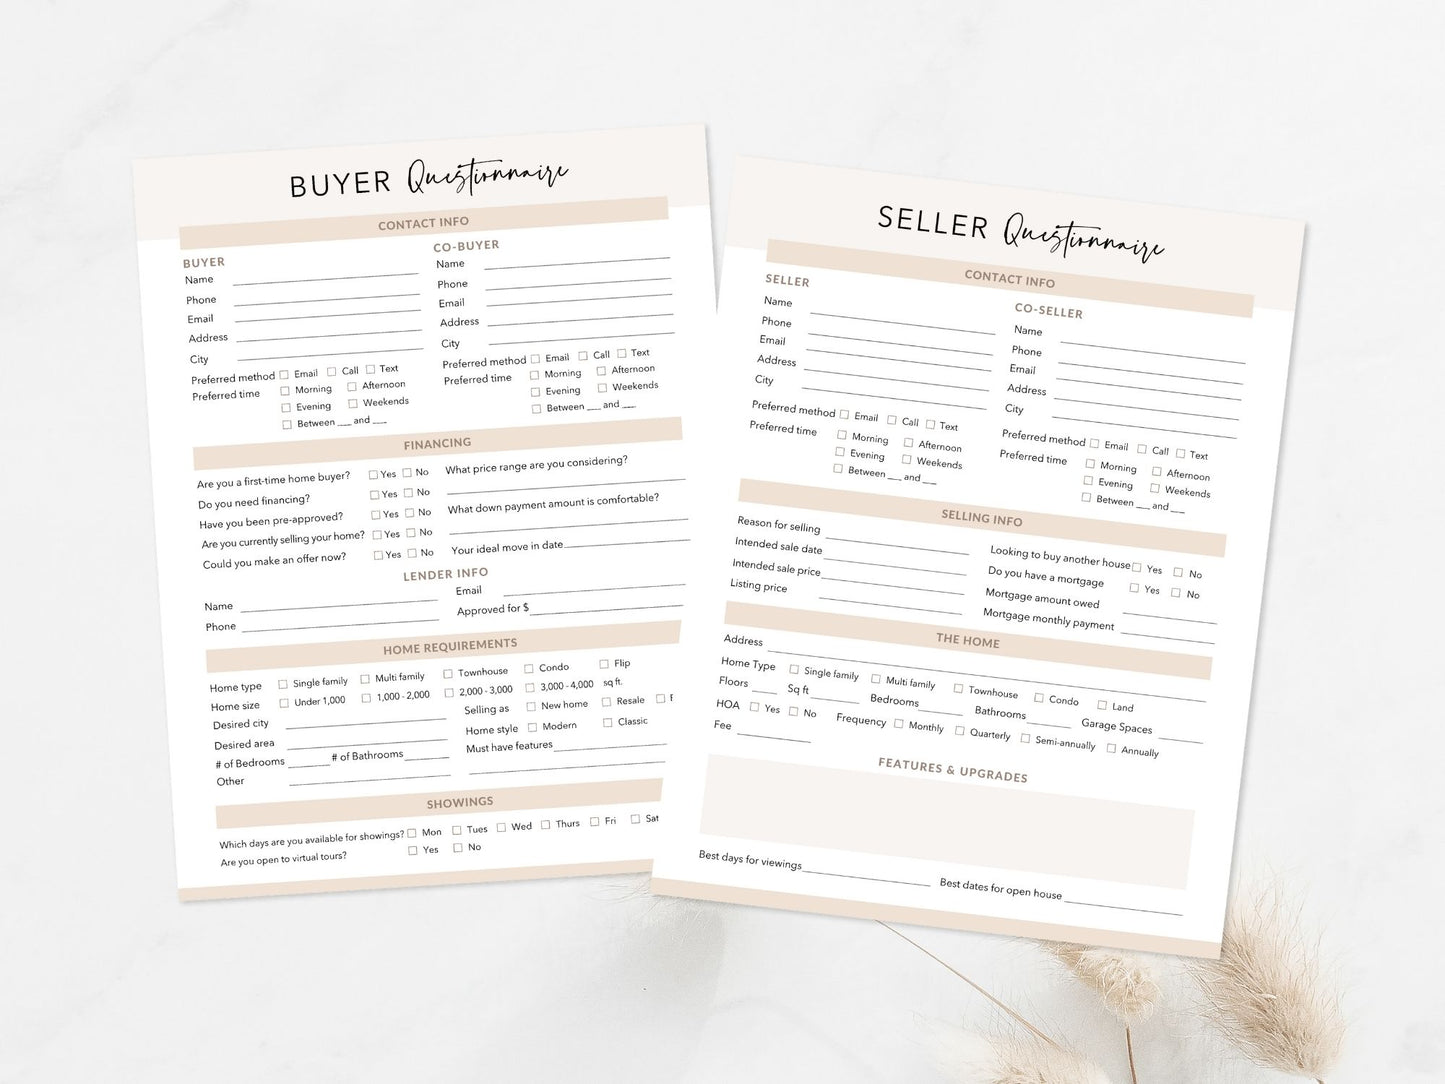 Real Estate Buyer & Seller Questionnaire - Editable template for enhancing client communication and ensuring a well-informed and organized real estate transaction process.